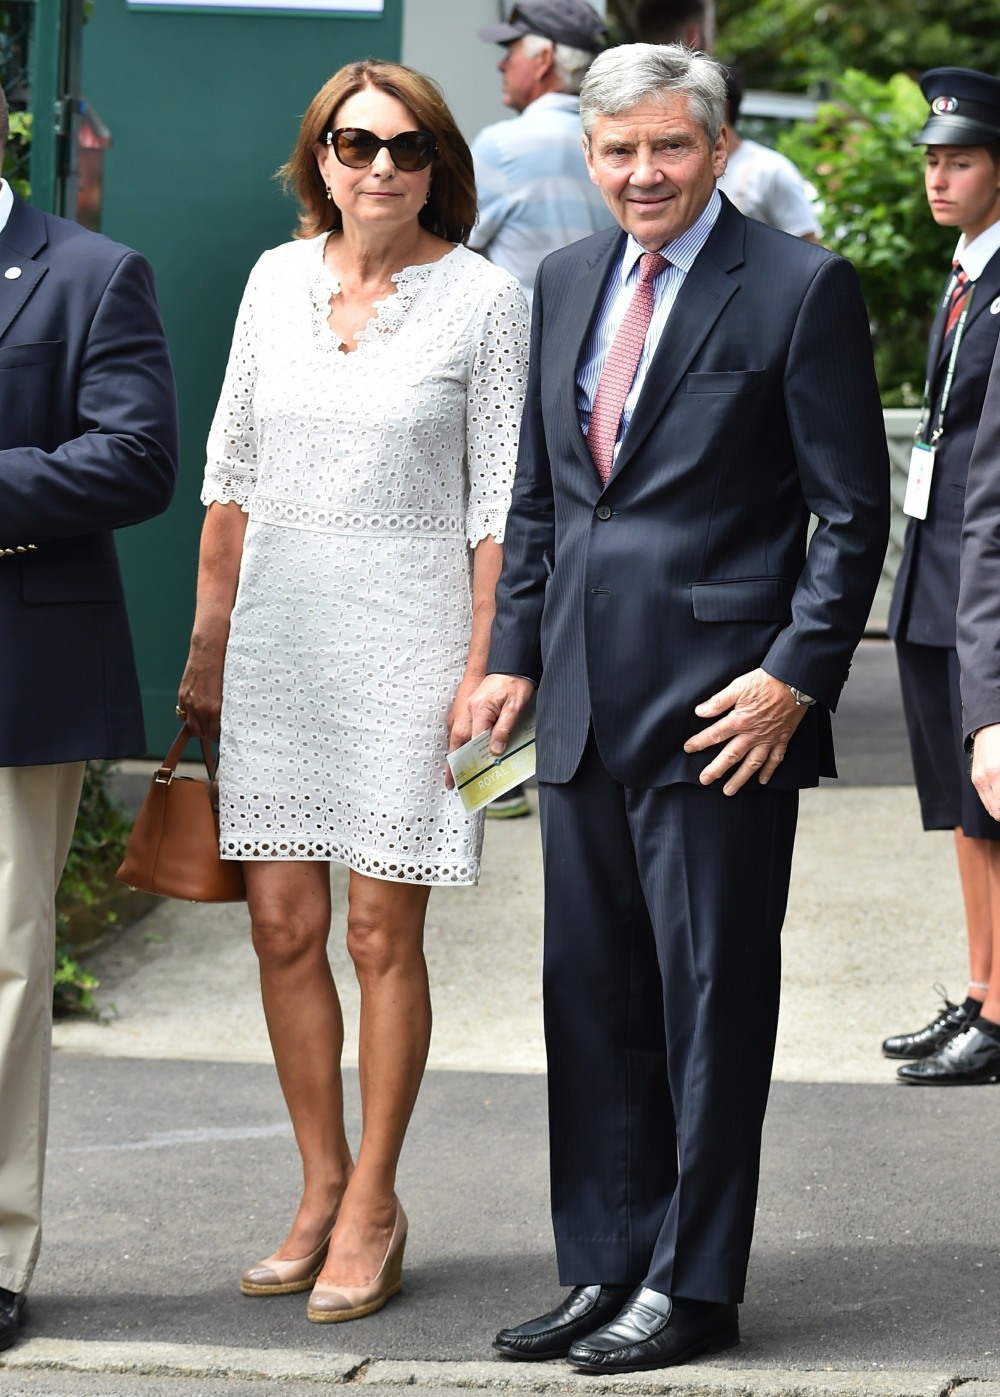 Middletons on the march! Carole and Michael arrive at Wimbledon for day three of the tennis championships